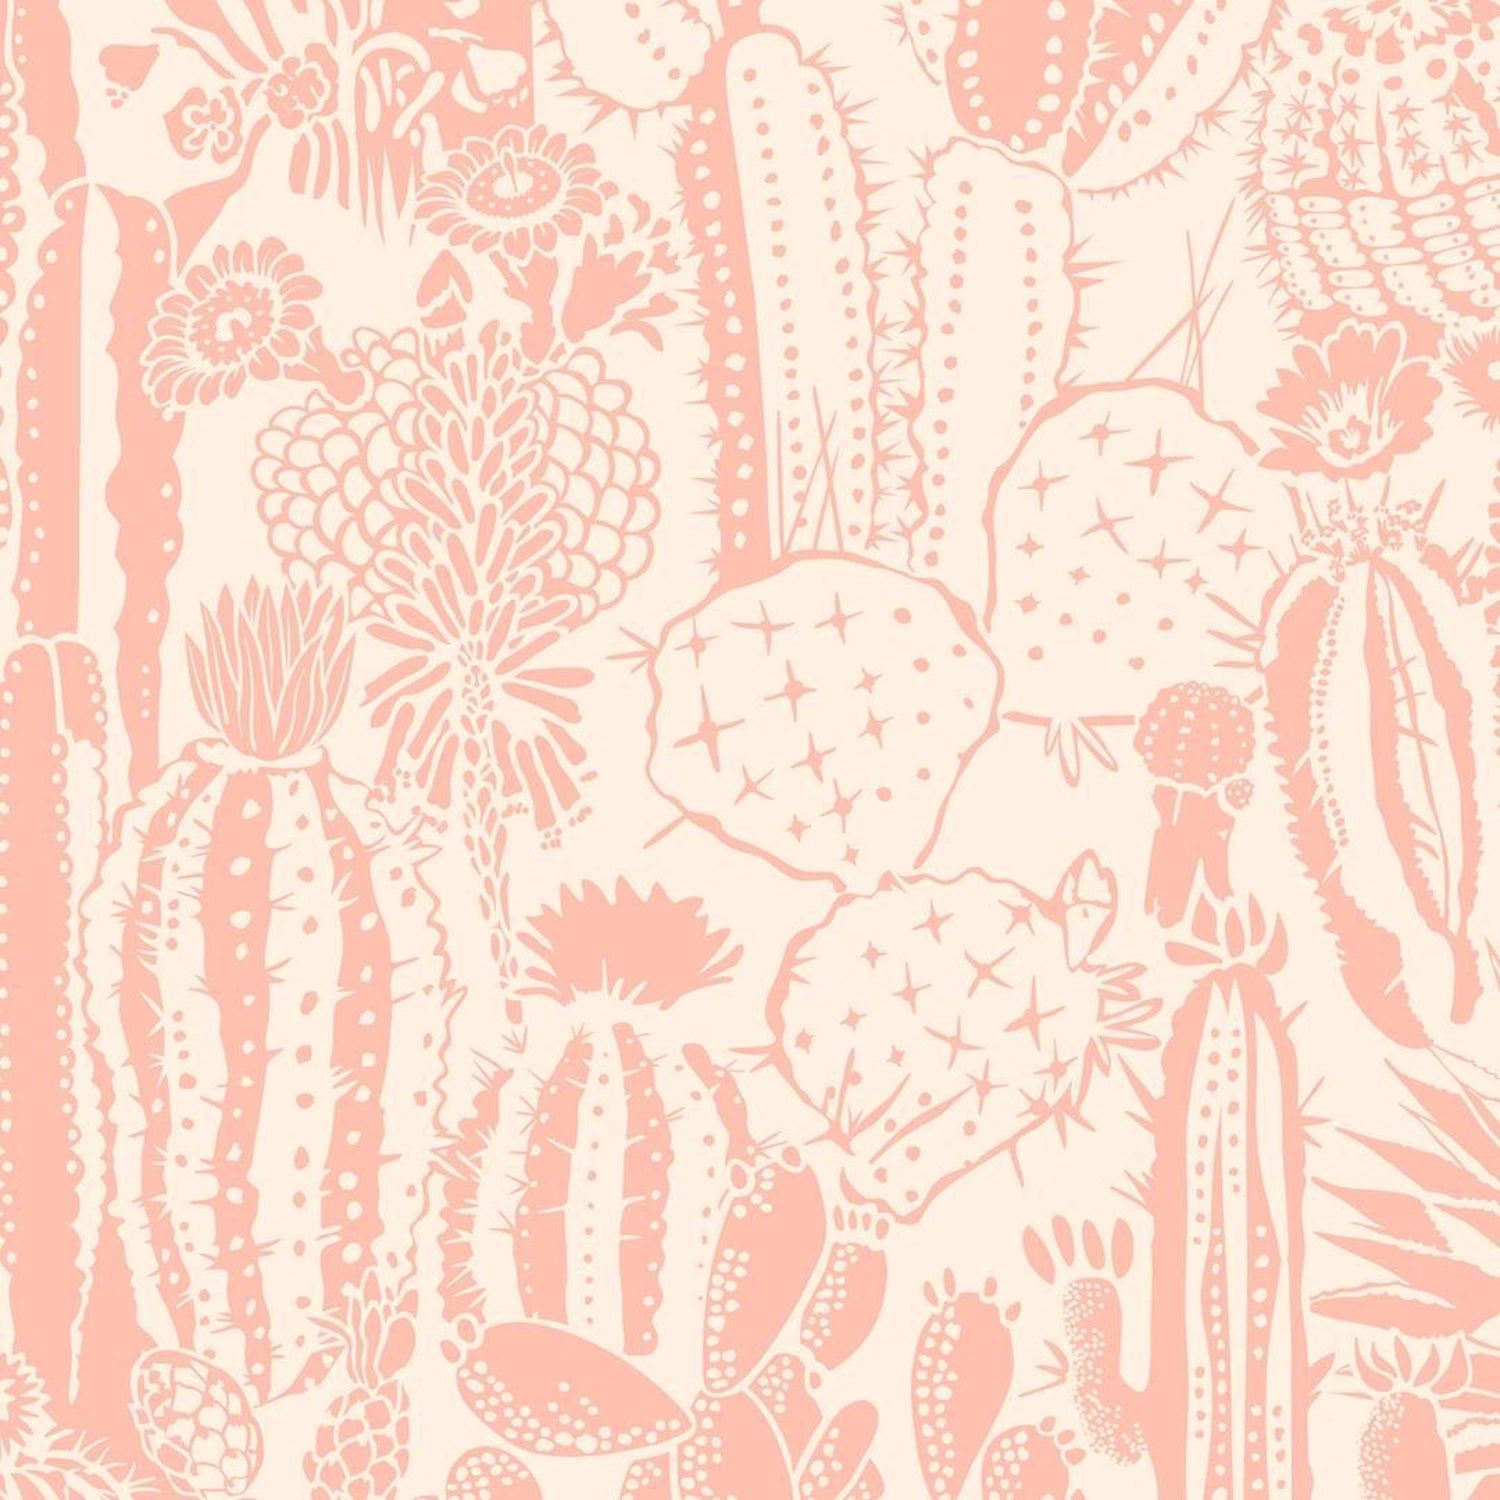 A cactus wallpaper in pink and white - Salmon, cactus, blush